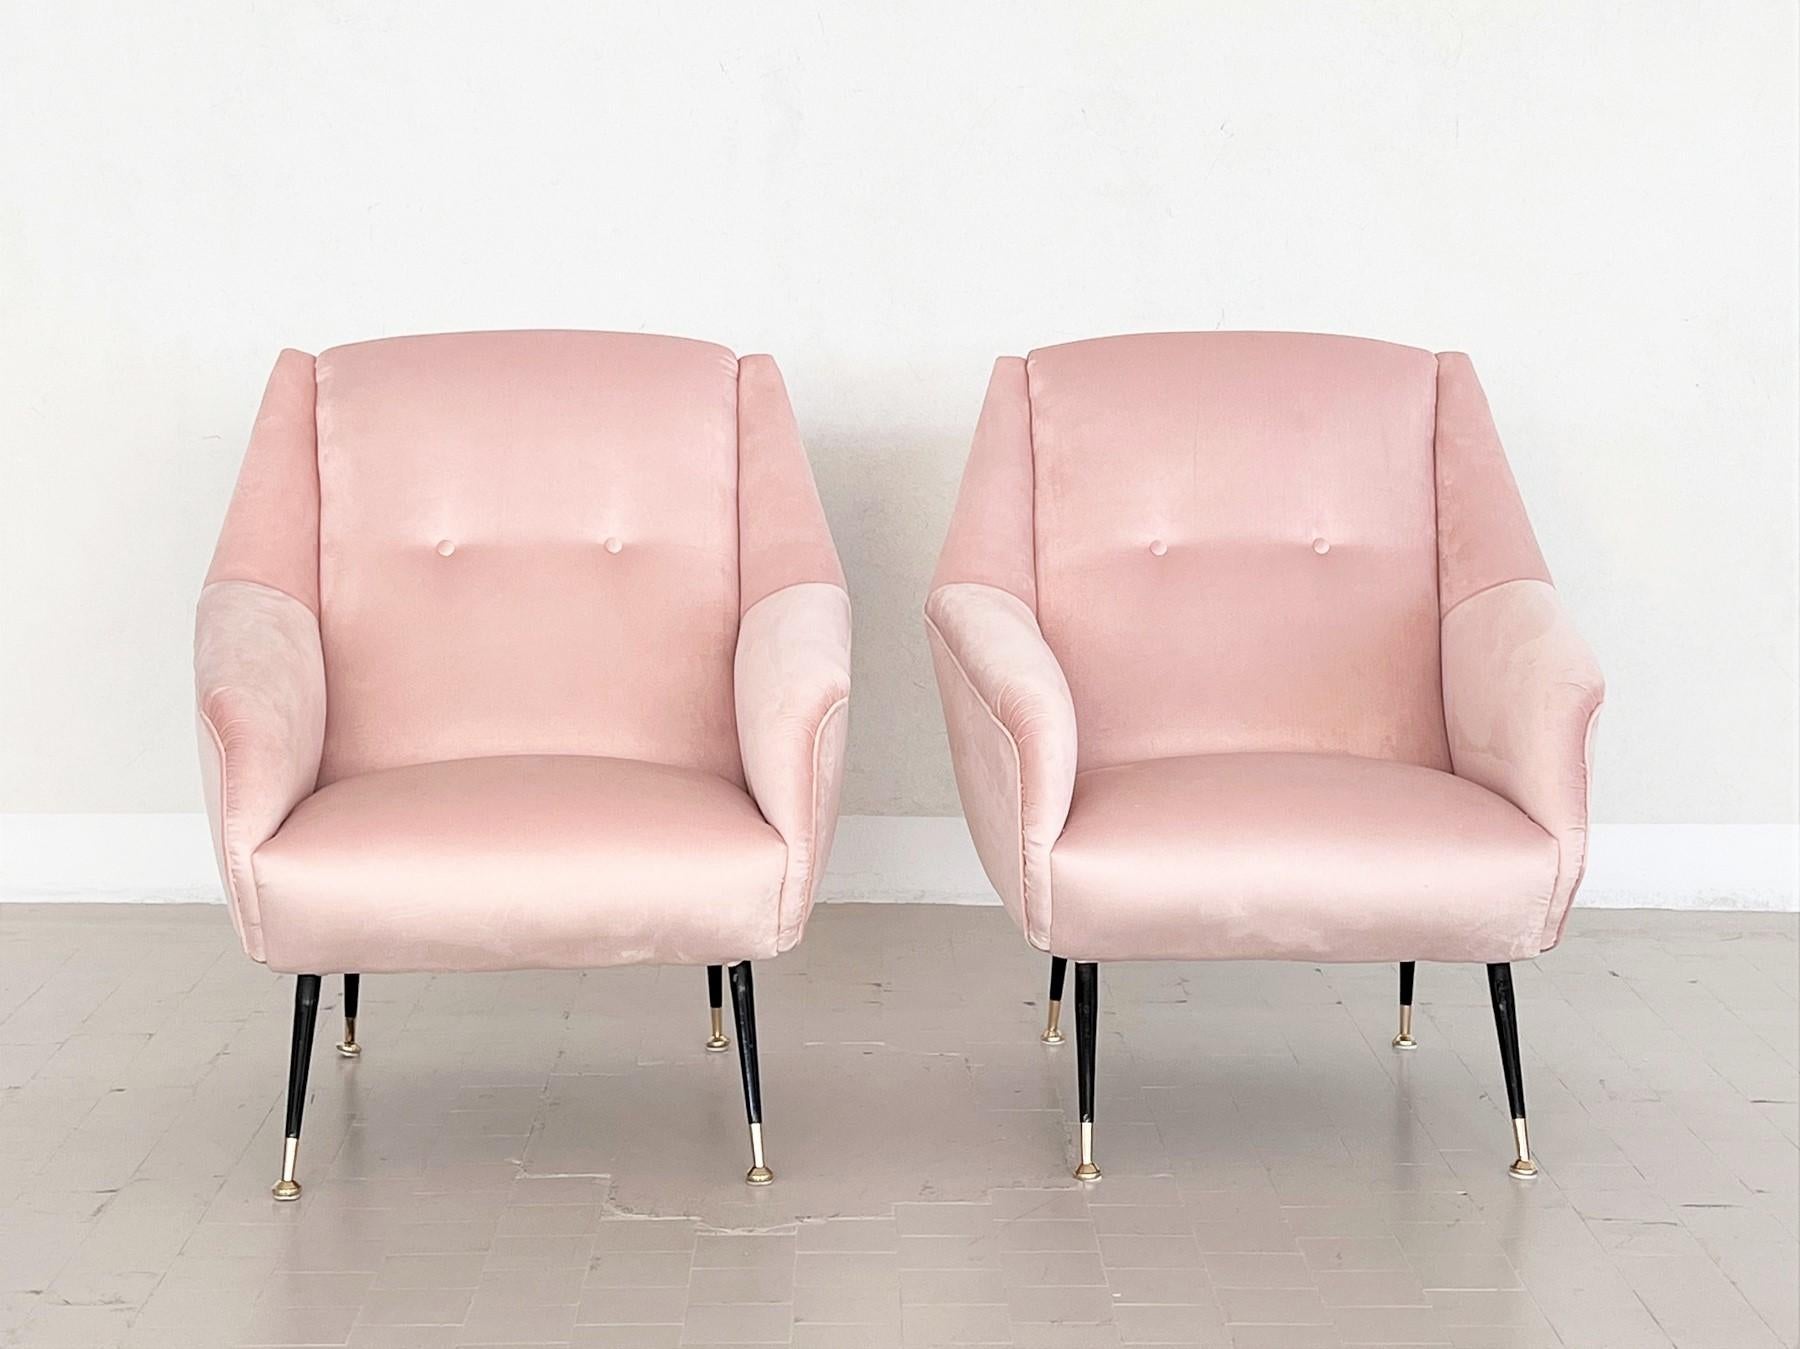 Italian Midcentury Armchairs in Soft Pink Velvet and Brass Tips, 1950s For Sale 2